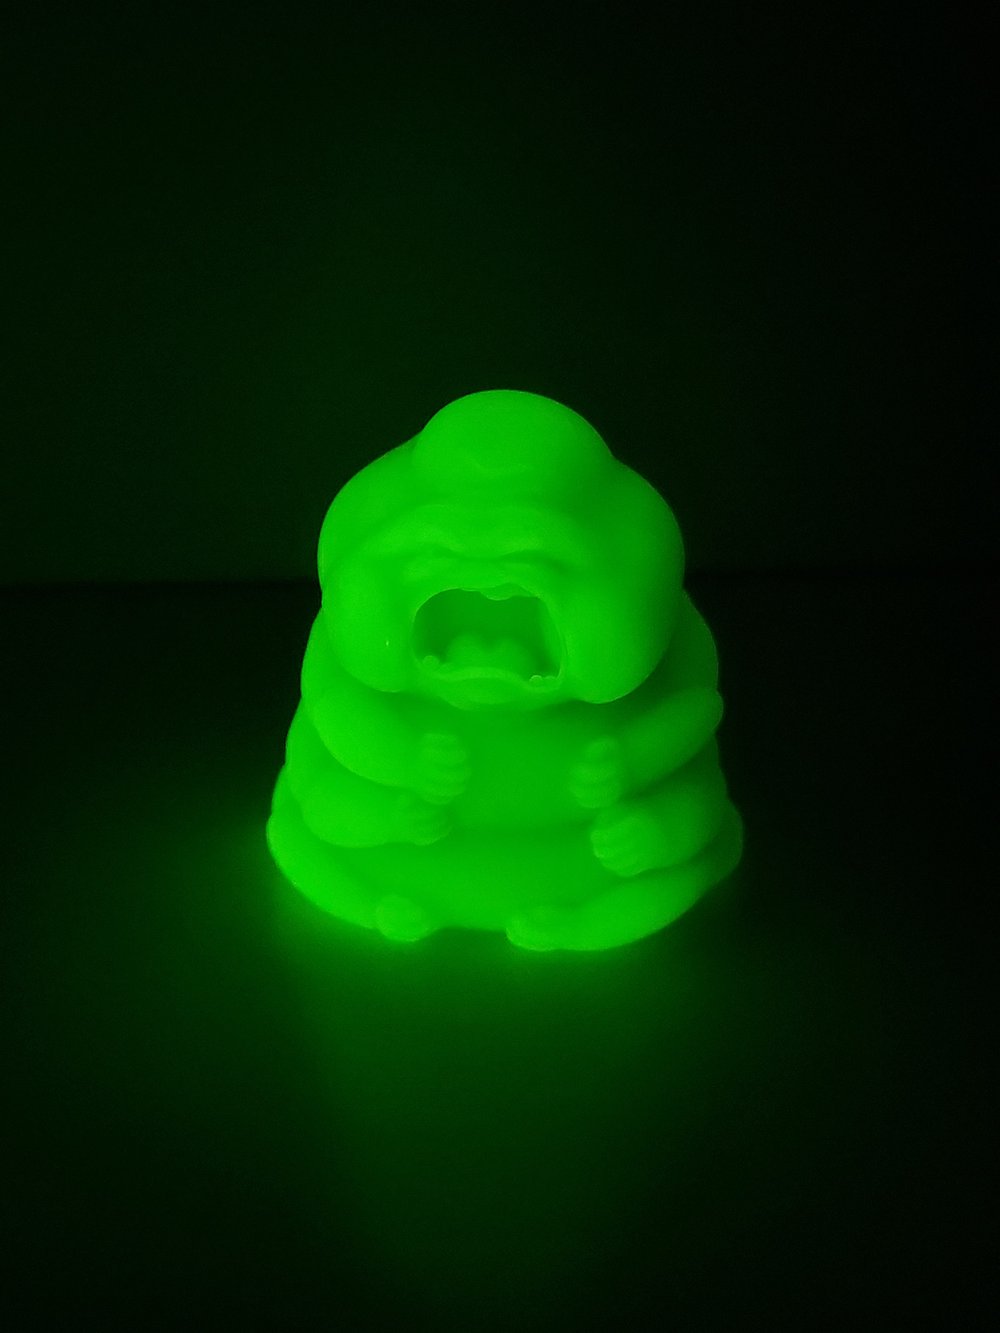 Crypt Creepers Glow Mini Munch 